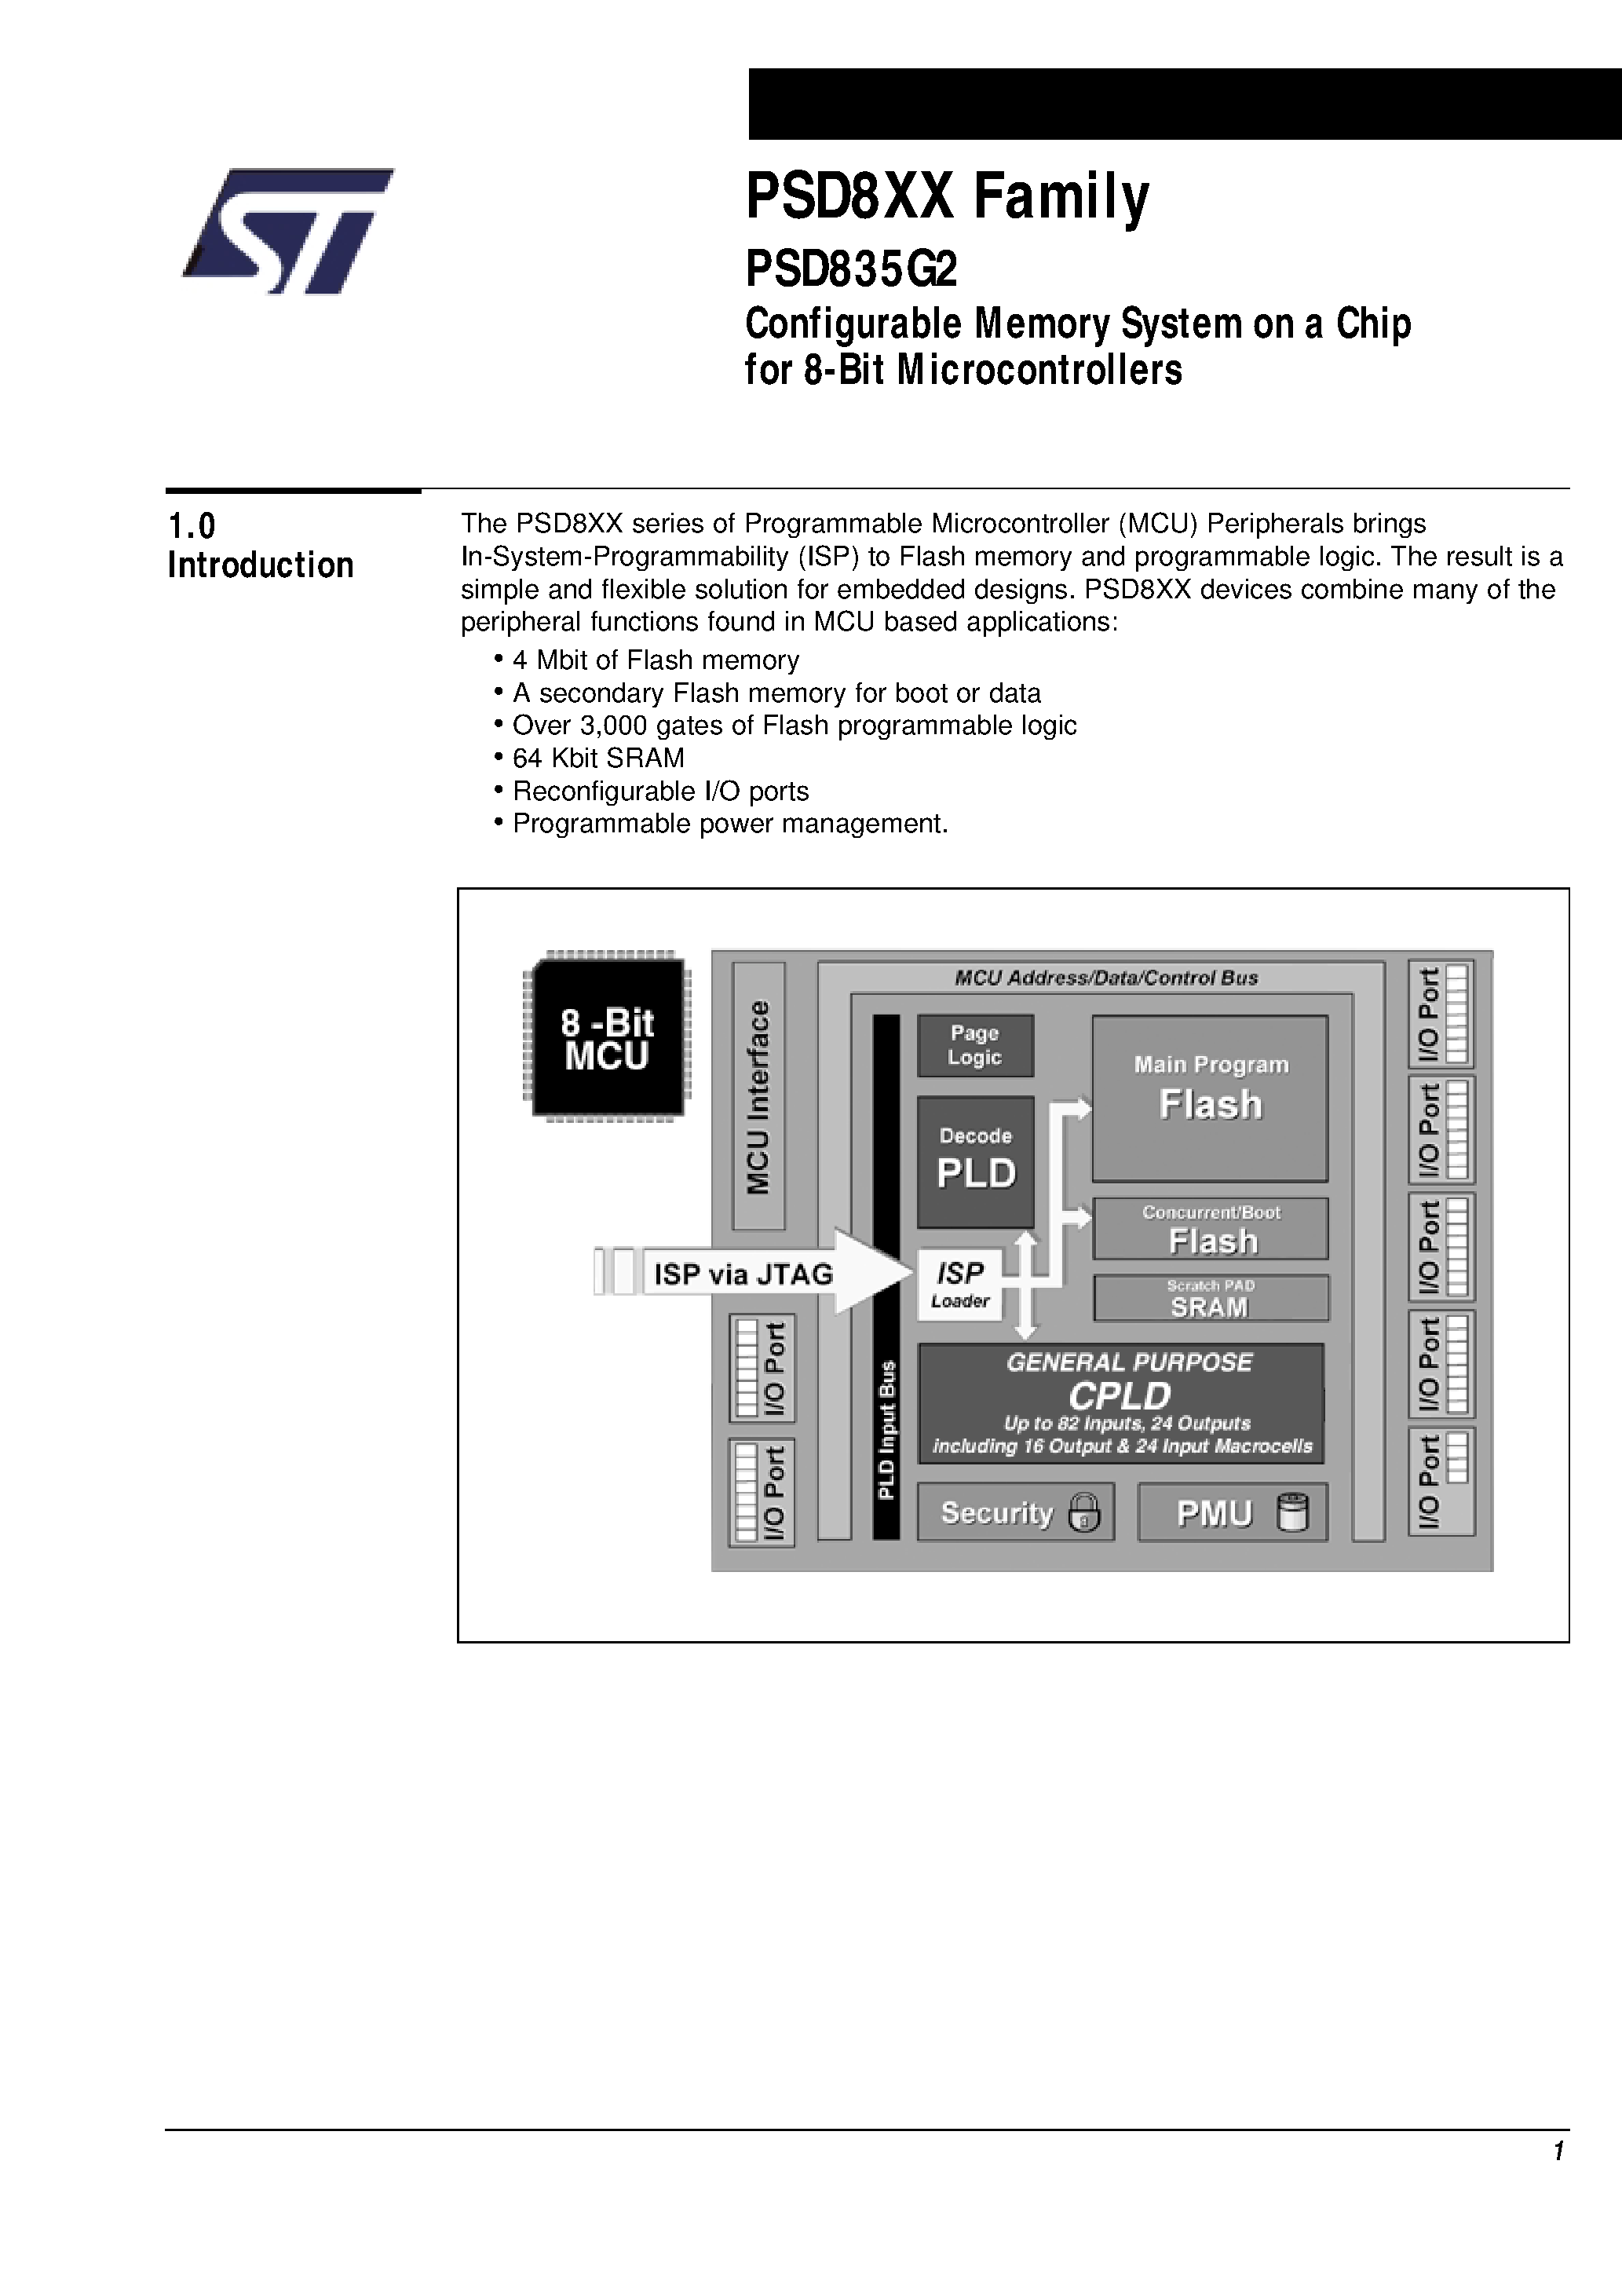 Datasheet PSD835F2-A-20M - Configurable Memory System on a Chip for 8-Bit Microcontrollers page 2